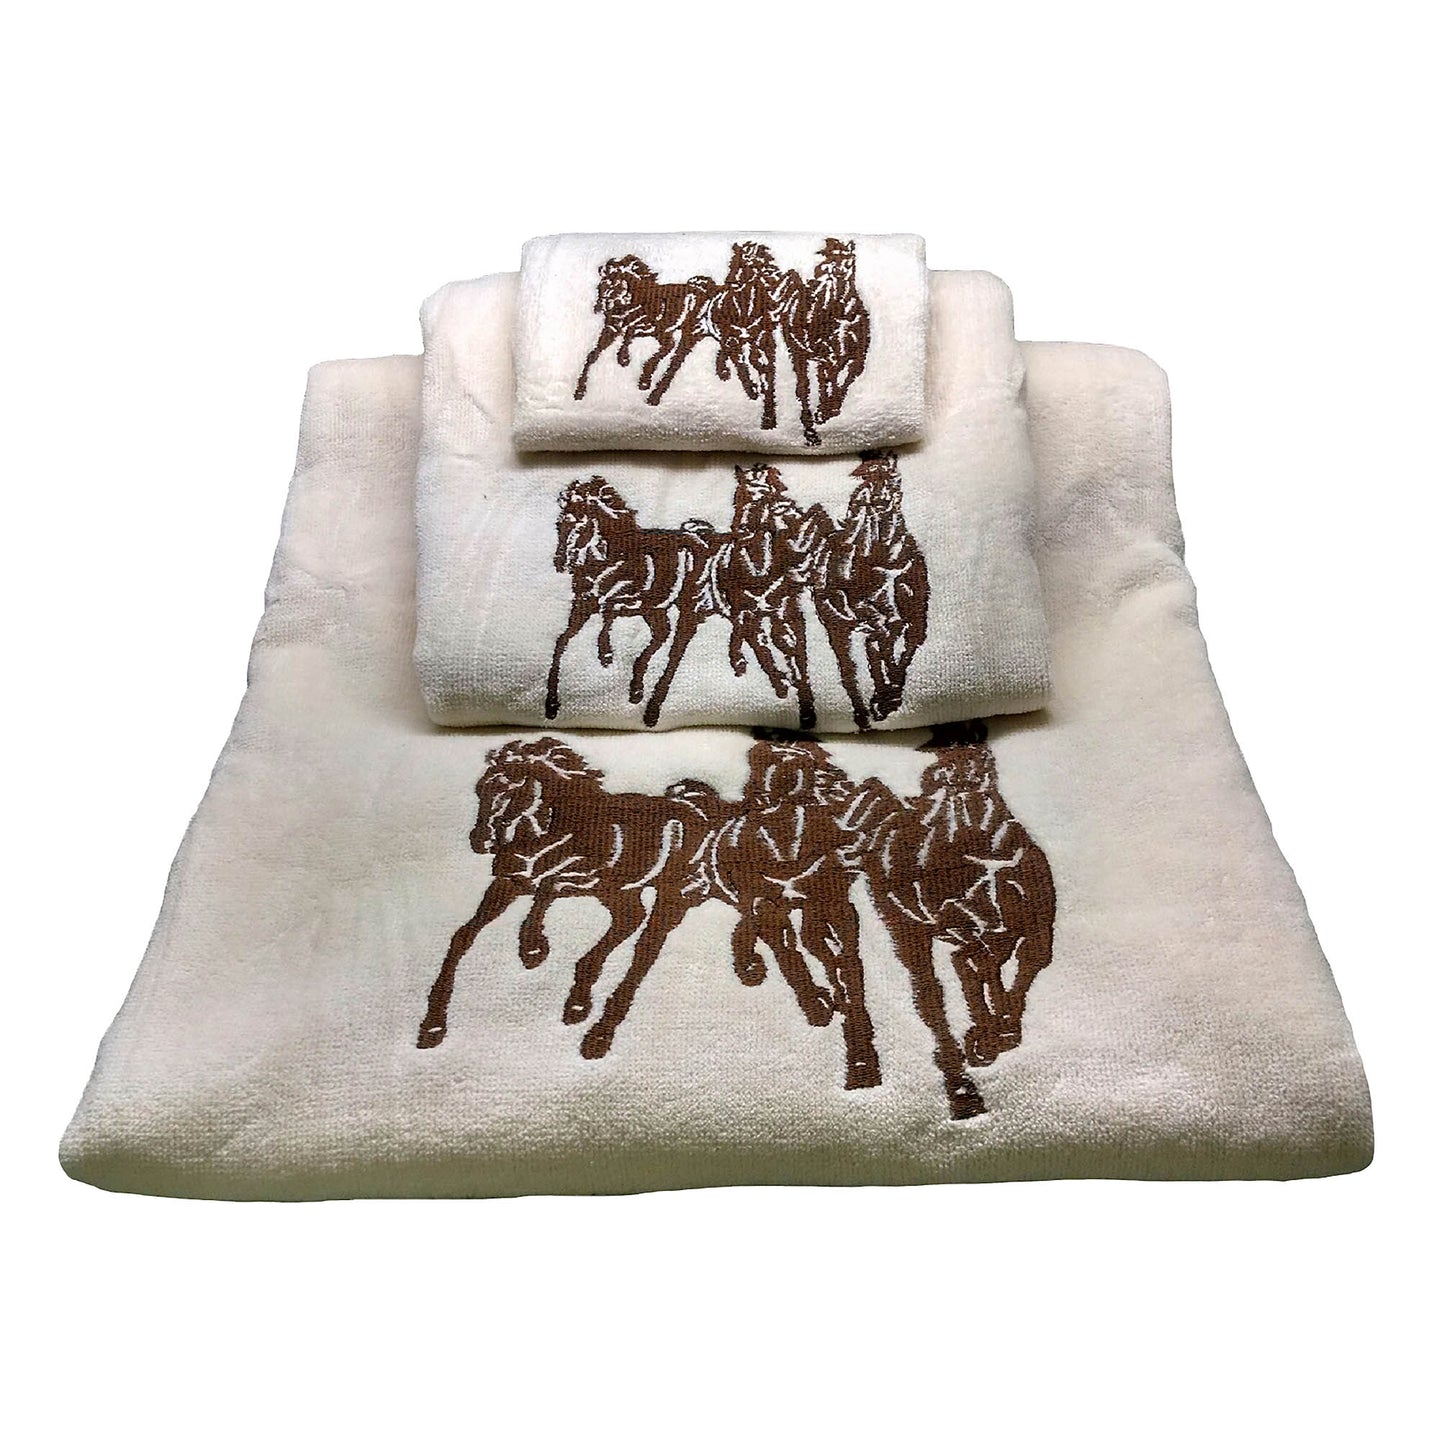 Embroidered Horses Towel Set